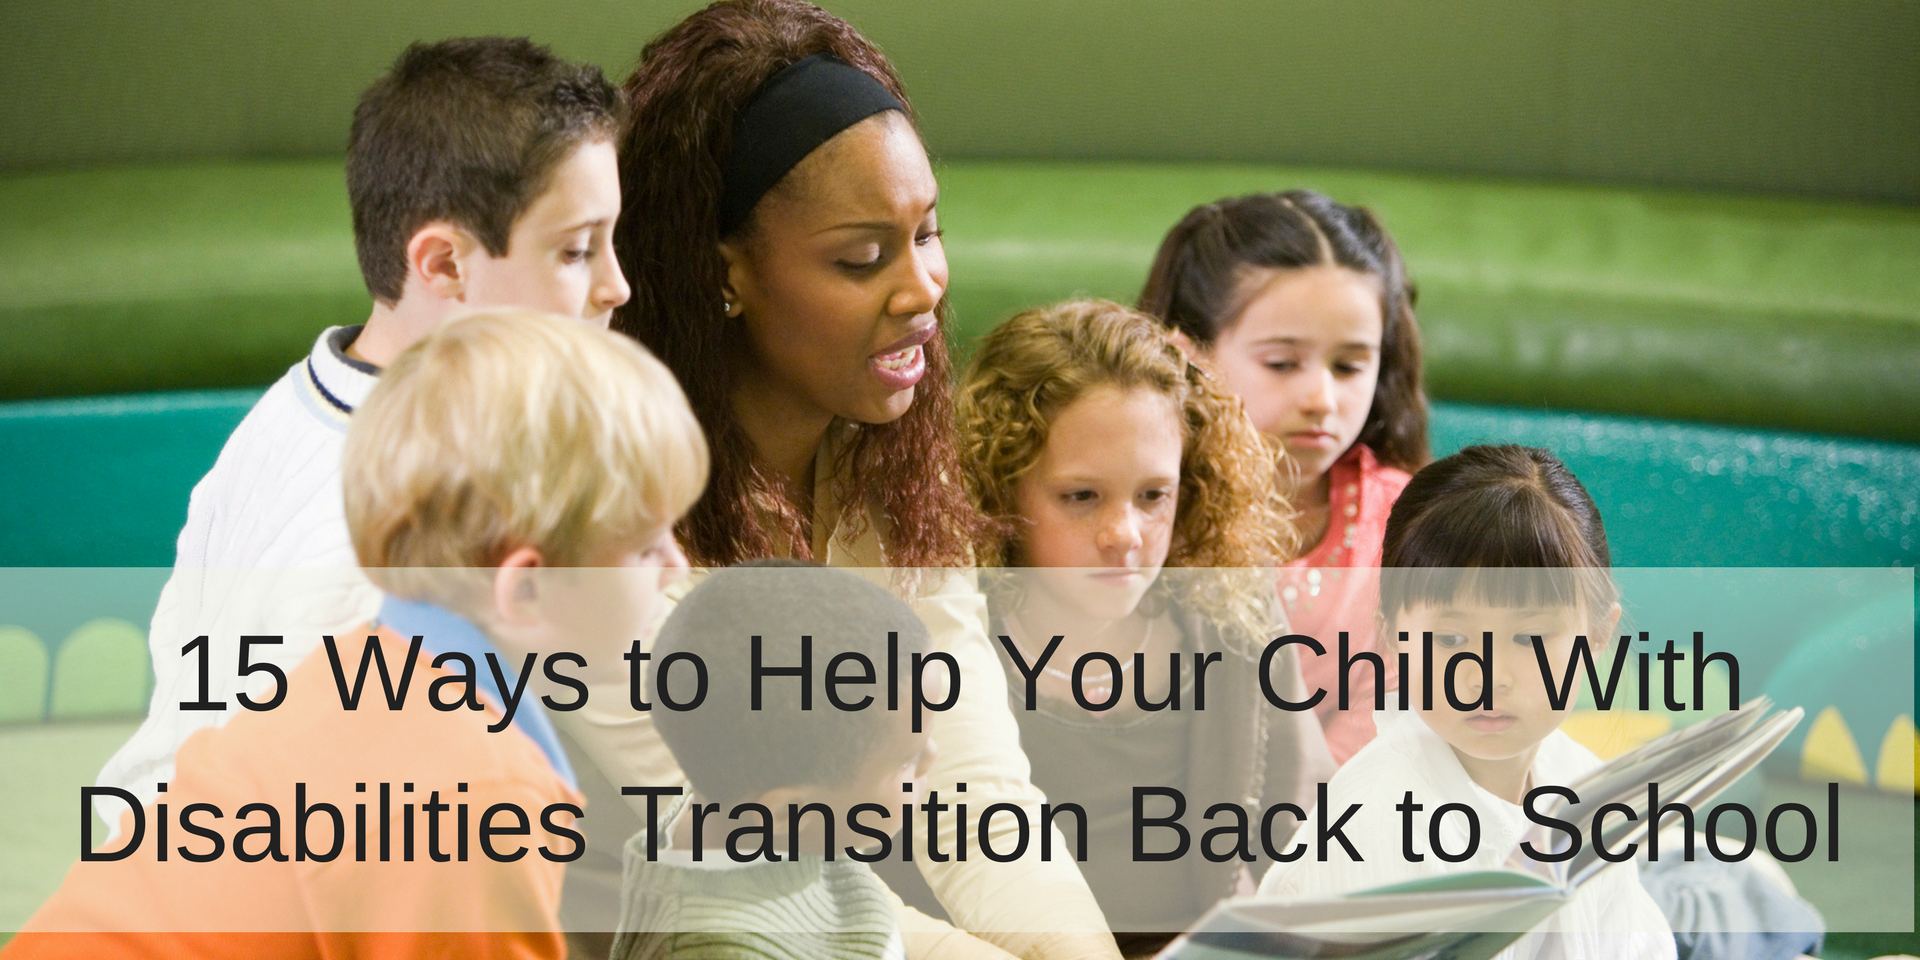 Ways to Help Your Child With Disabilities Transition Back